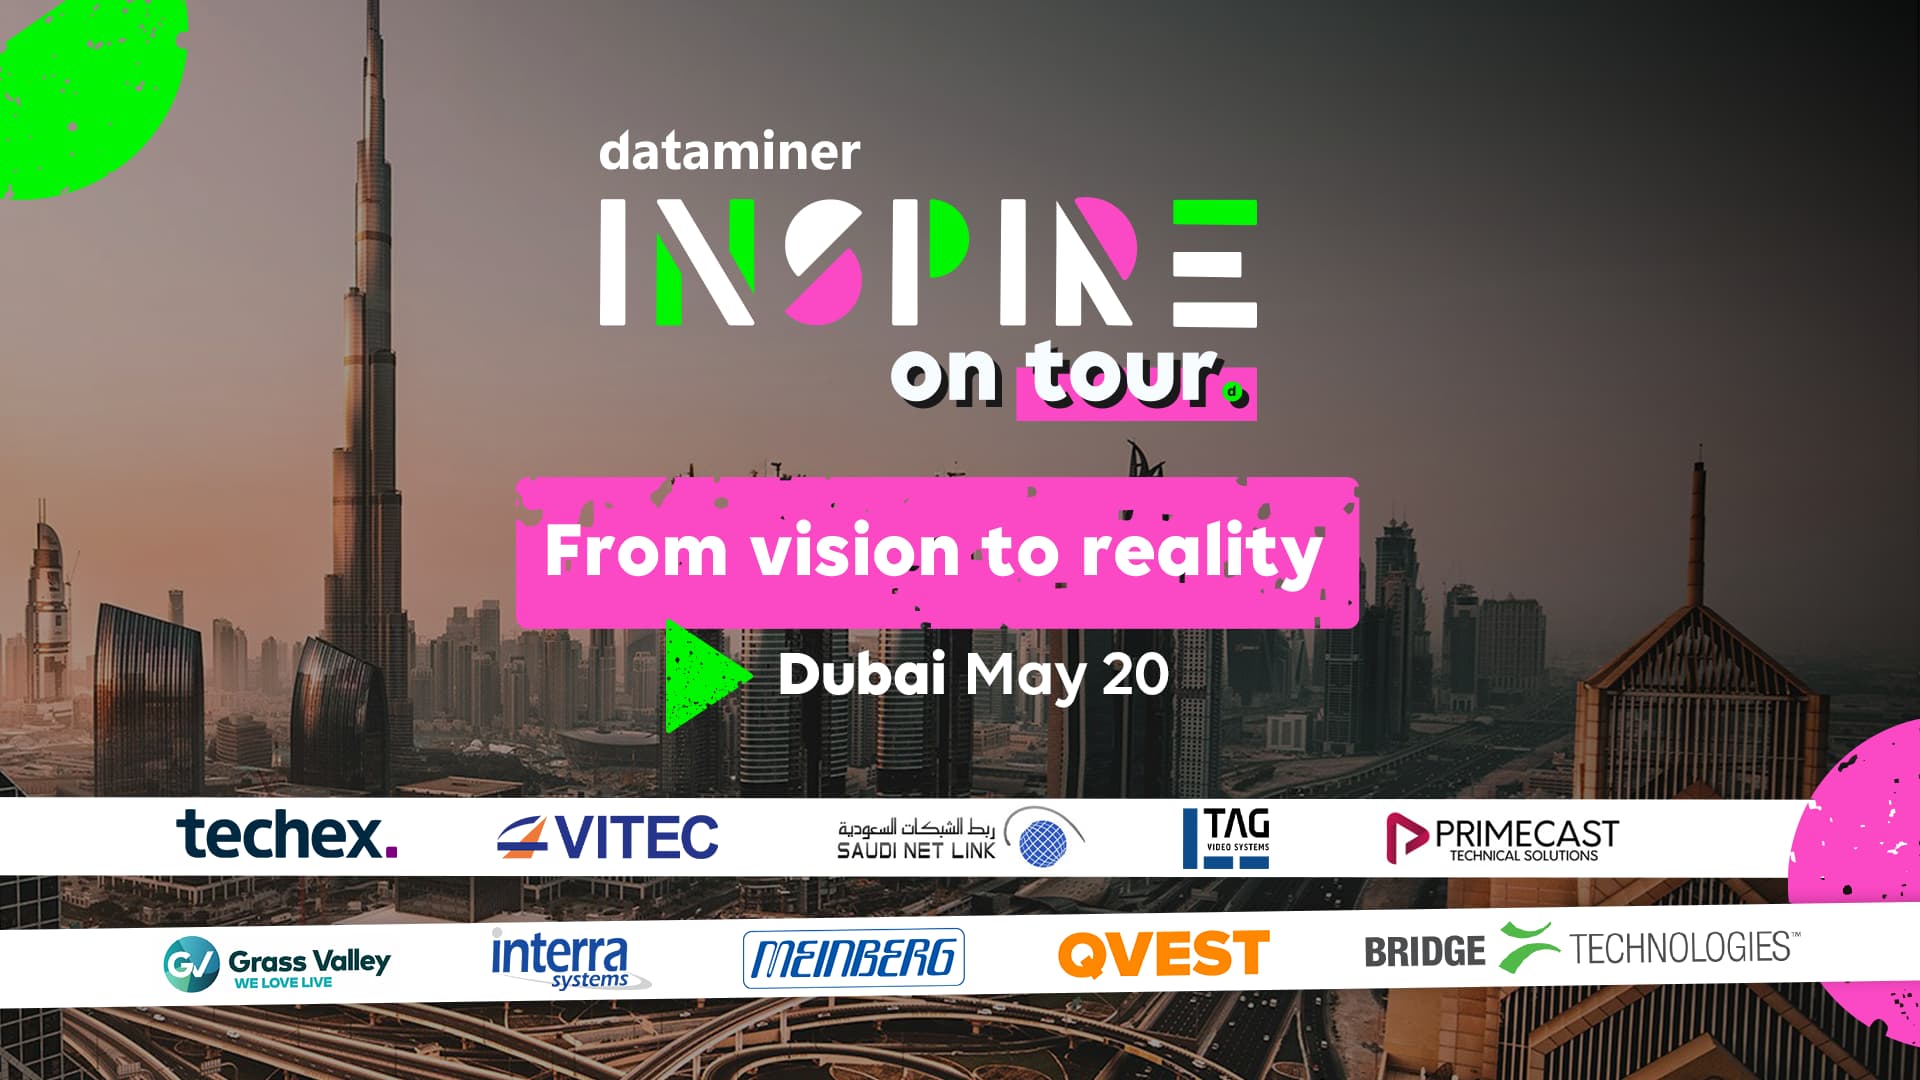 Promo image for DataMiner Inspire in Dubai on May 20th